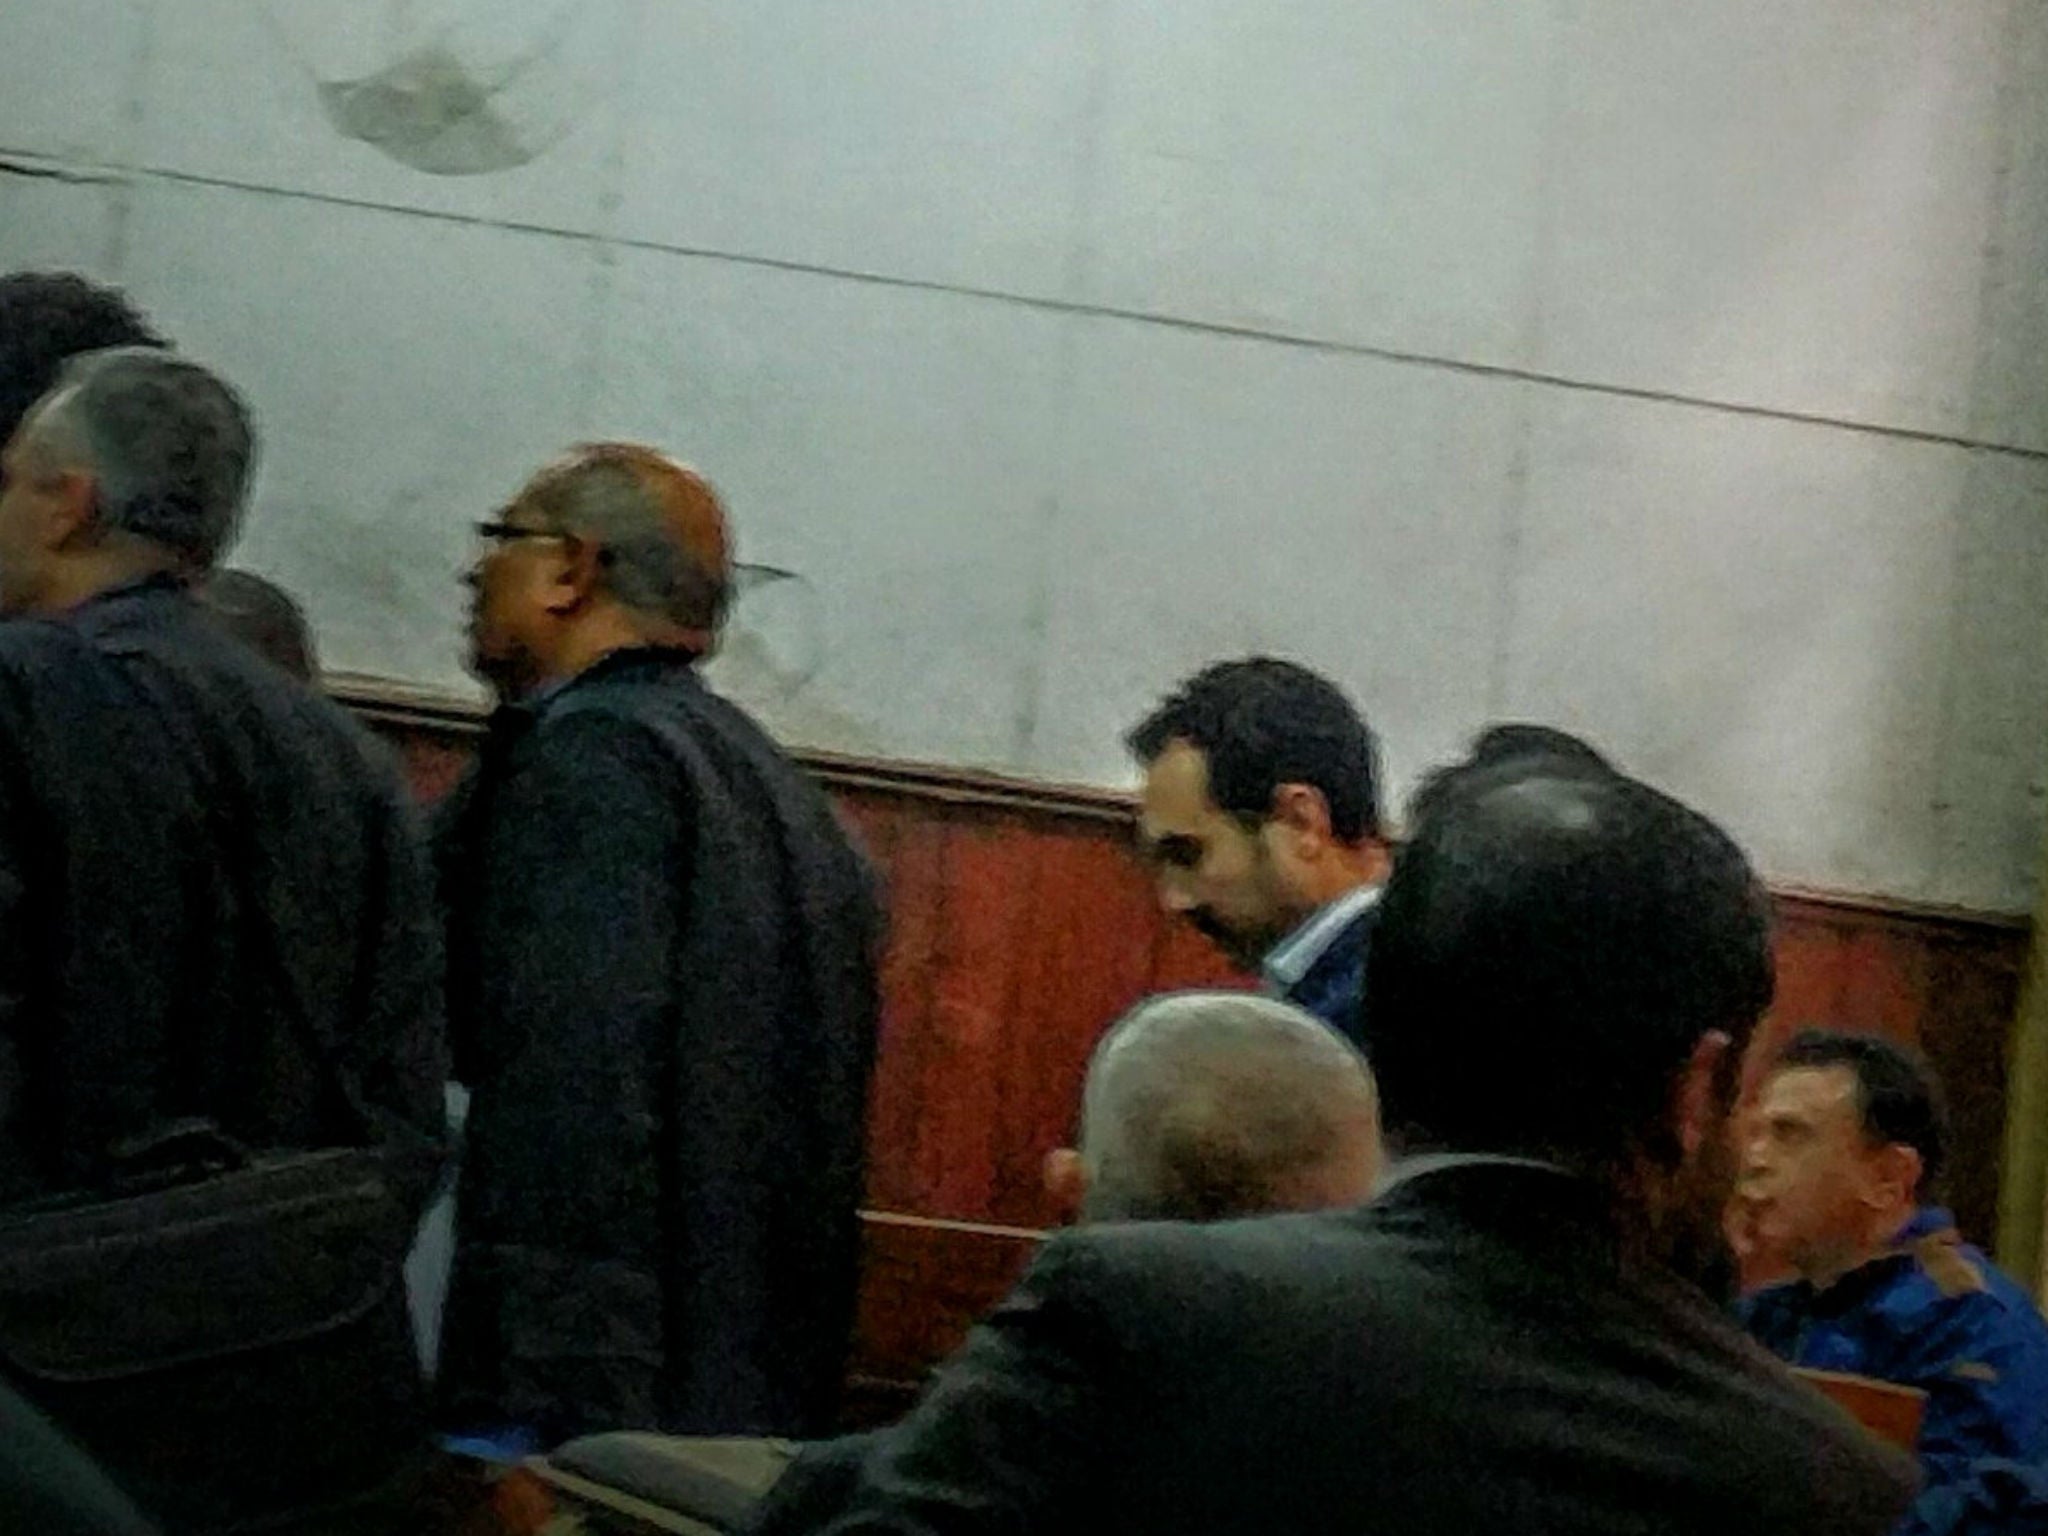 Naji (centre with head bowed) attends the court hearing in Cairo